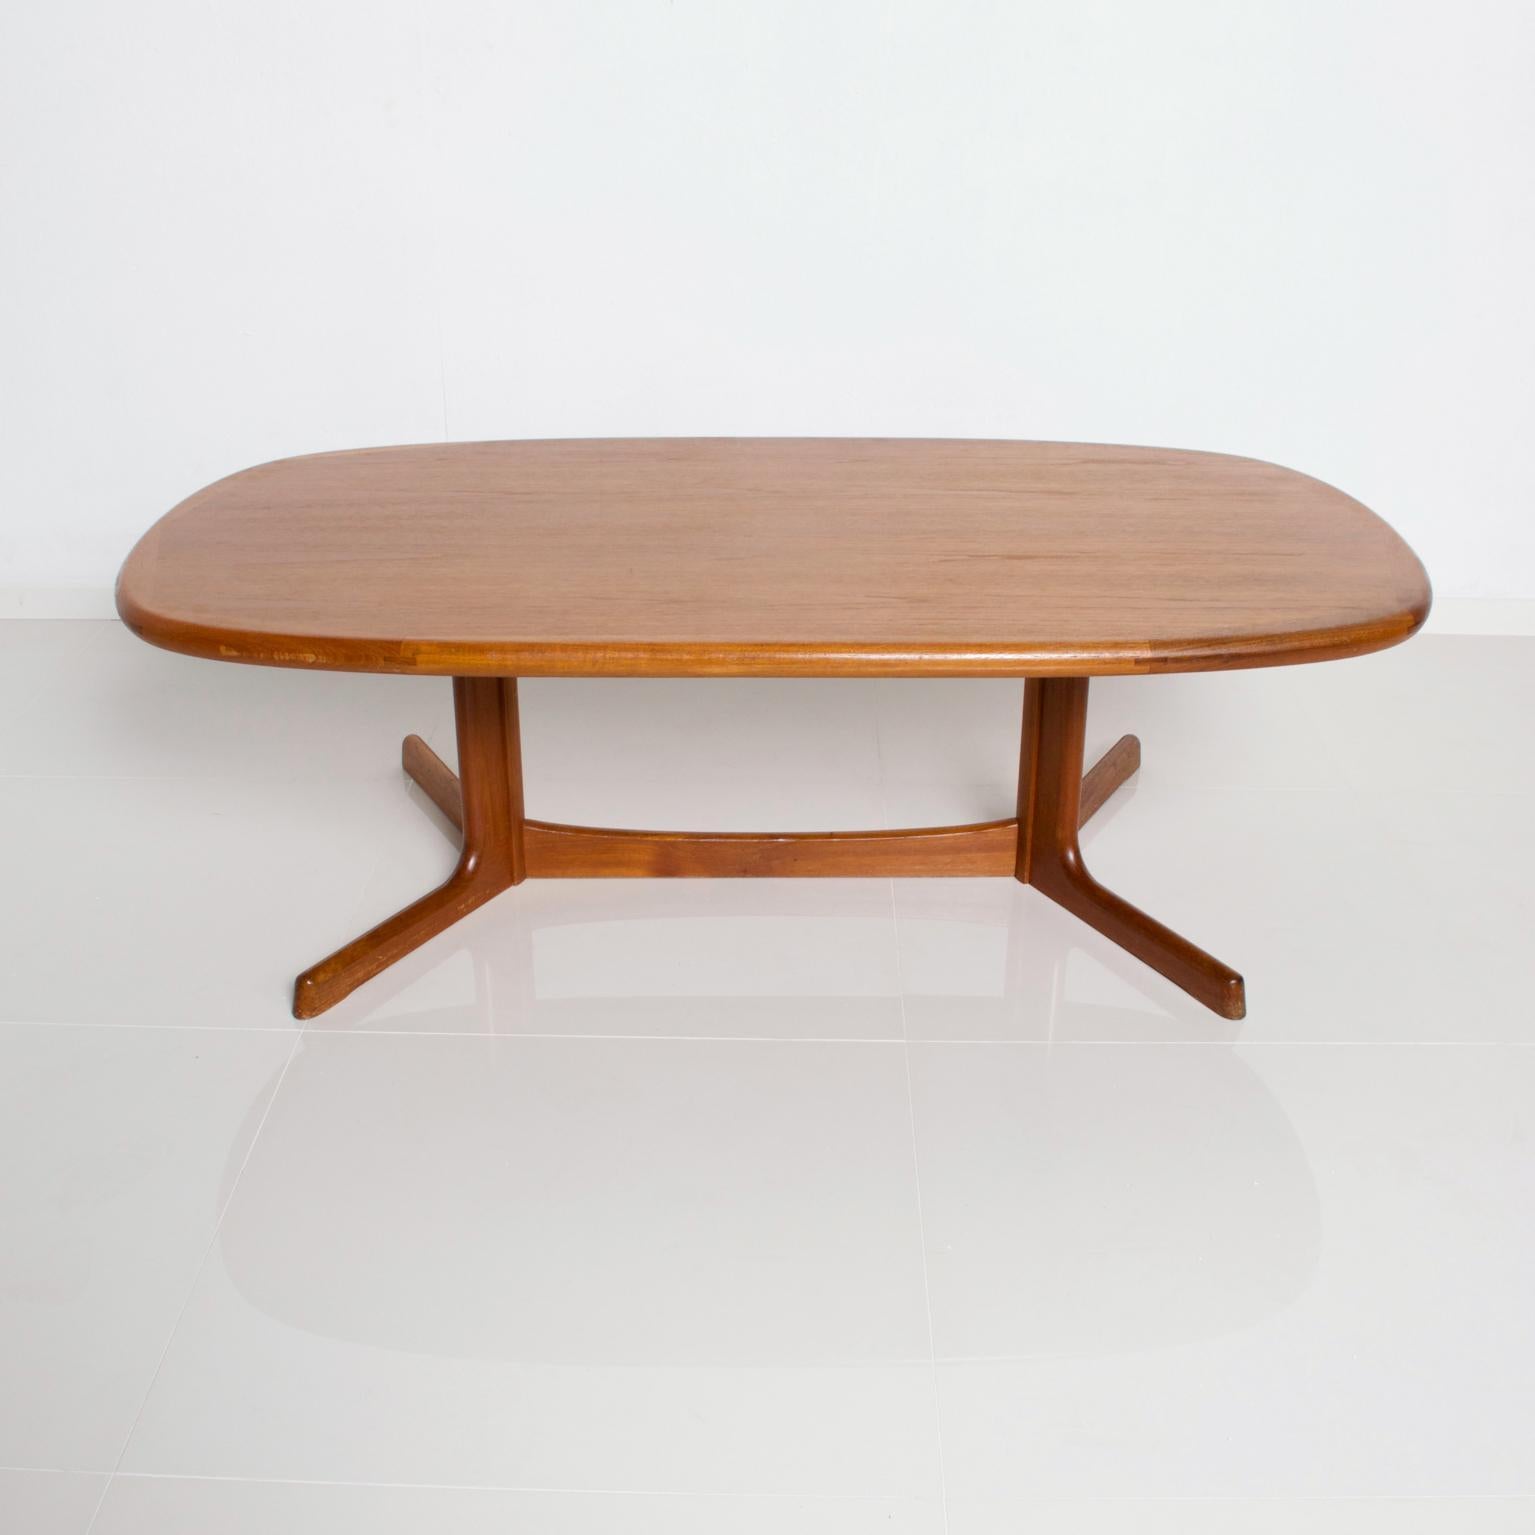 We are pleased to offer for your consideration a coffee table in teak made in Denmark by Dyrlund. Sculptural shape with solid teak legs. Brass label underneath the table Legs can be removed for sage and easy shipping. Dimensions: 53